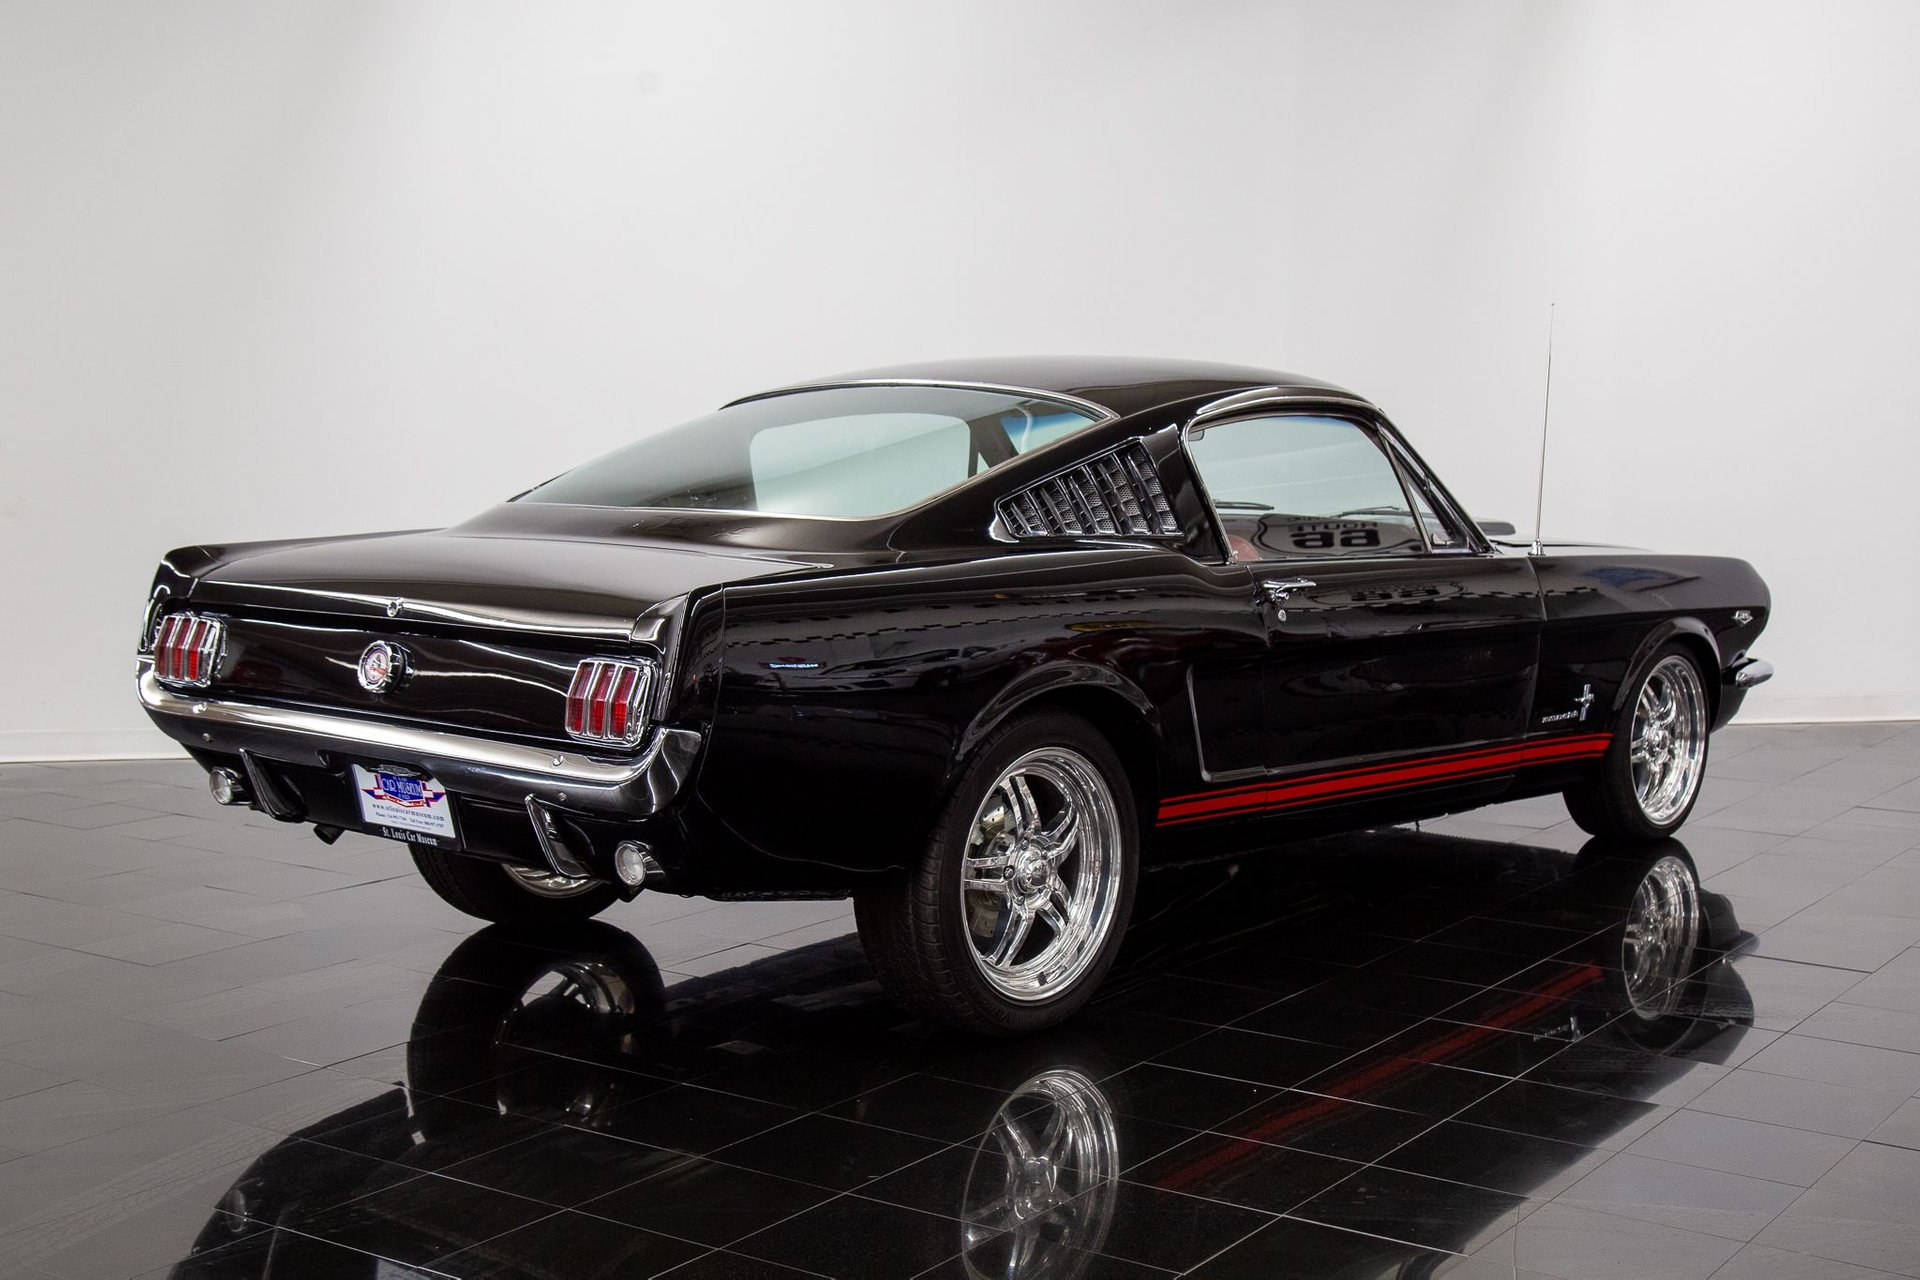 Miniature American muscle FORD MUSTANG GT 2+2 1966 NOIR RAVEN